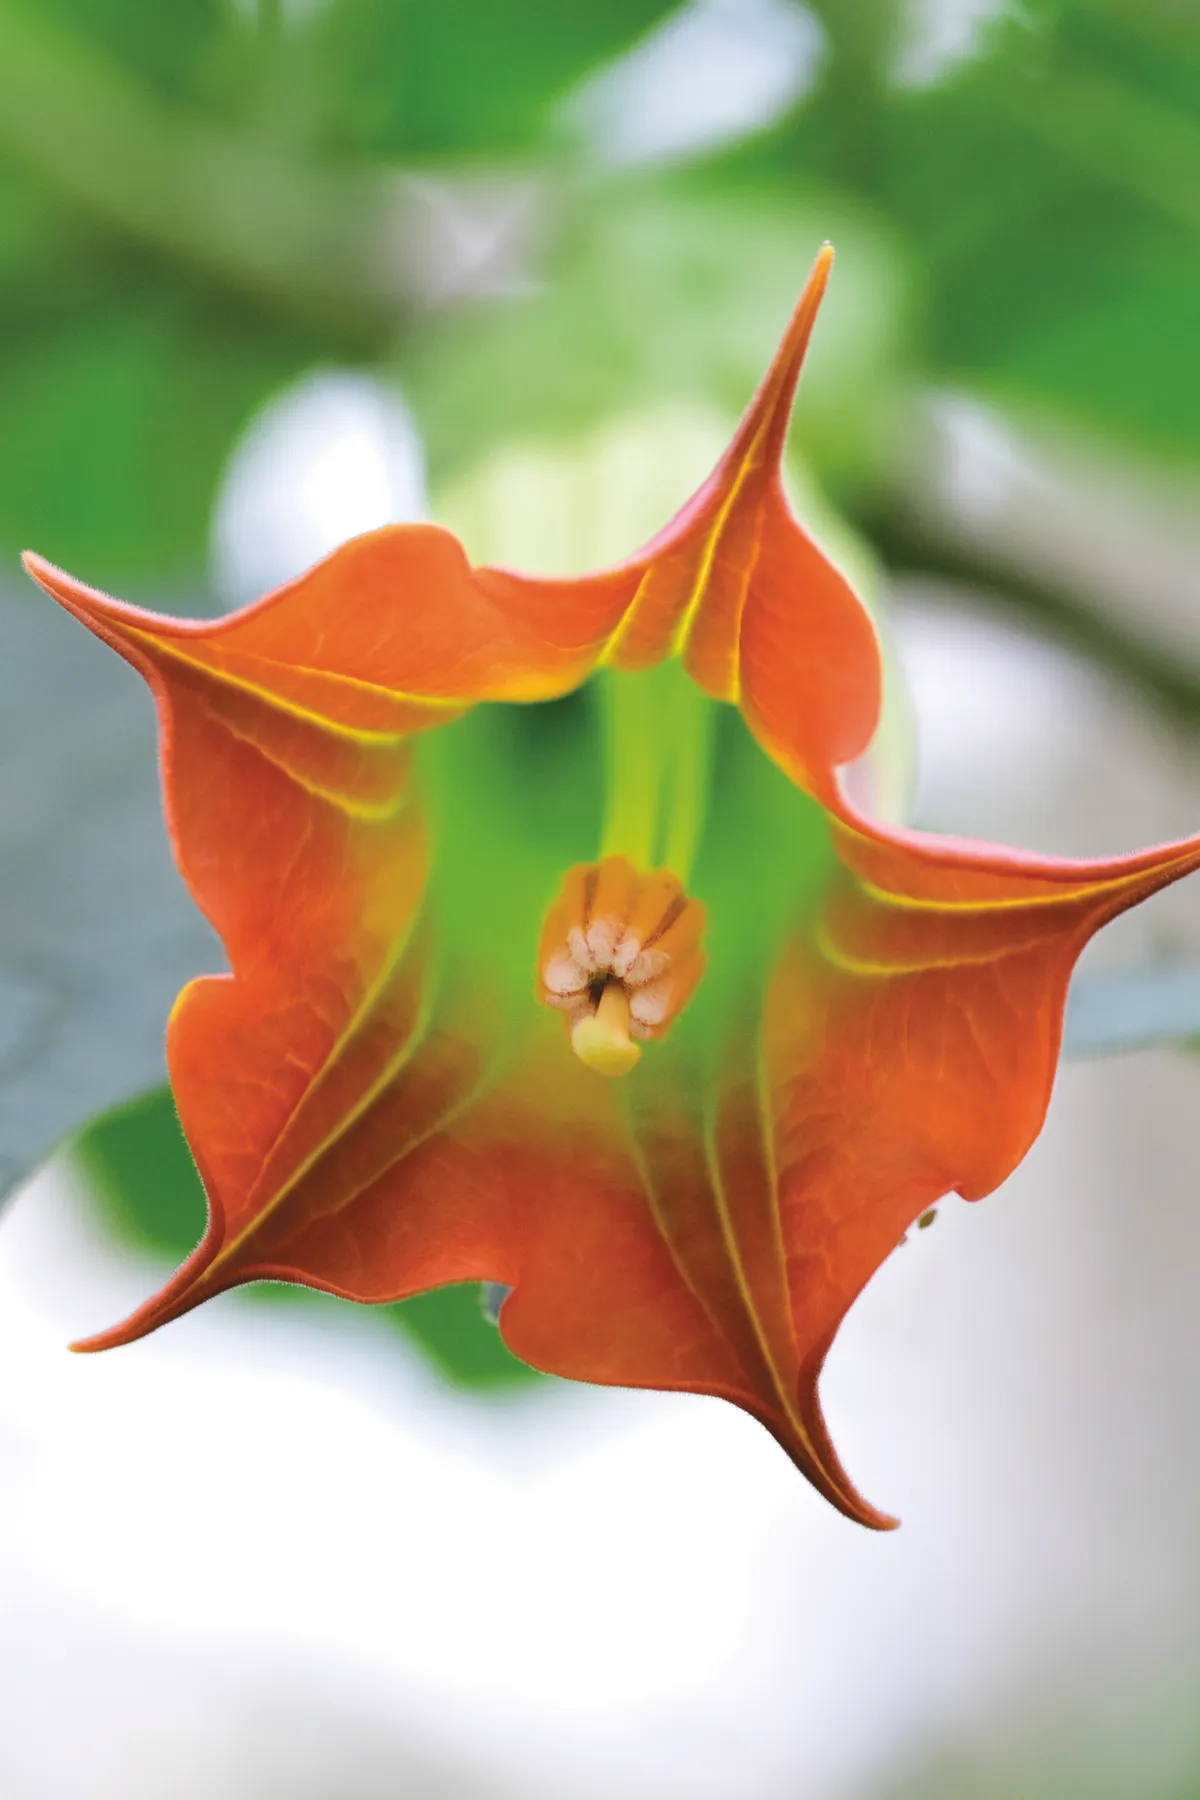 Brugmansia sanguinea is native to Latin America but now extinct in the wild. © RBG Kew